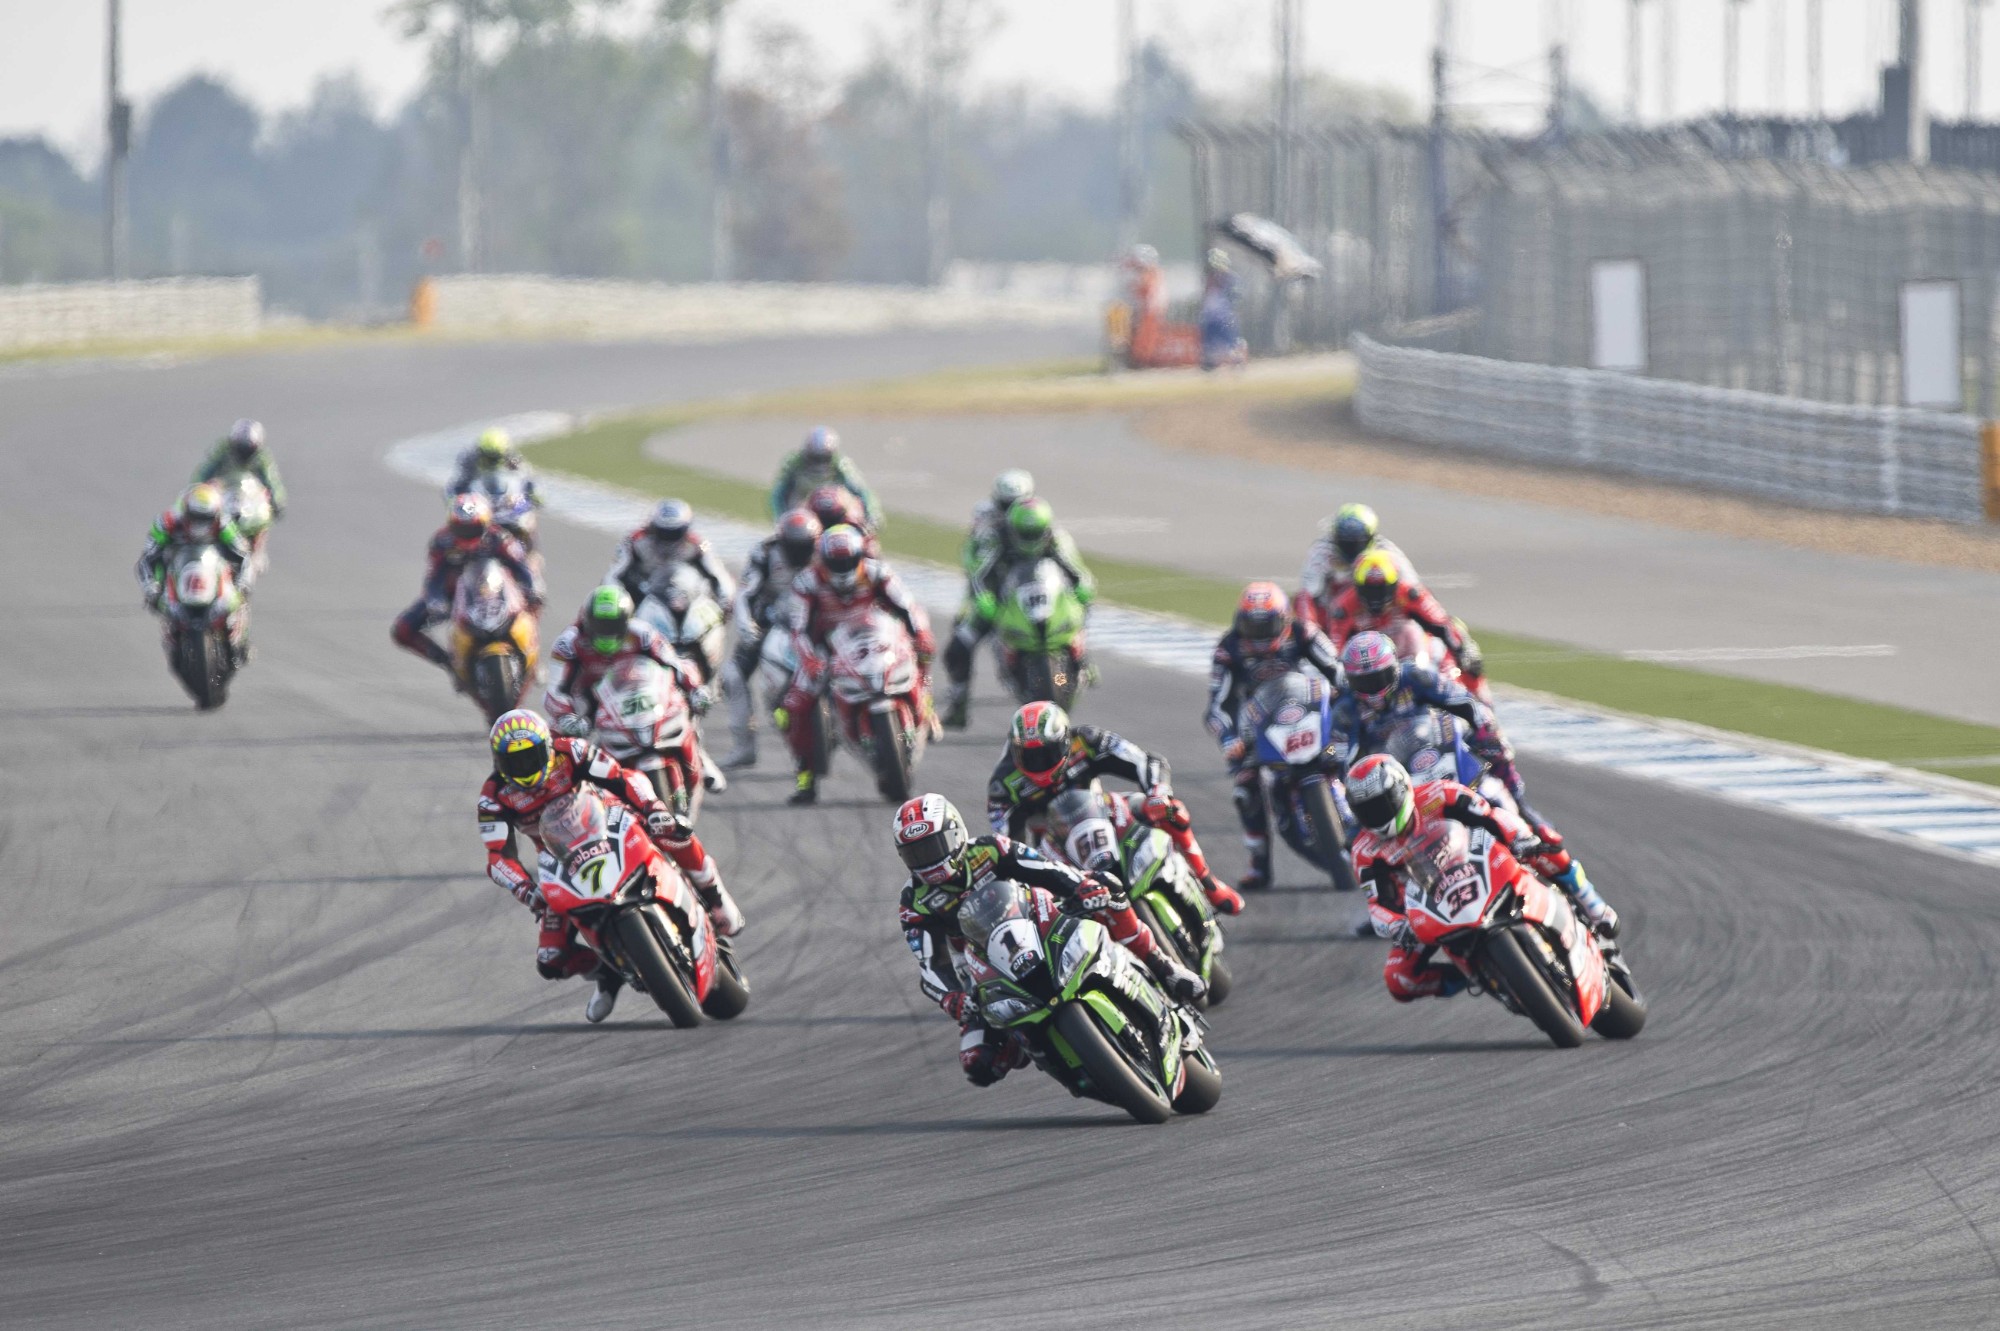 World Superbike beIN SPORTS Will Broadcast The Races From Thailand Live